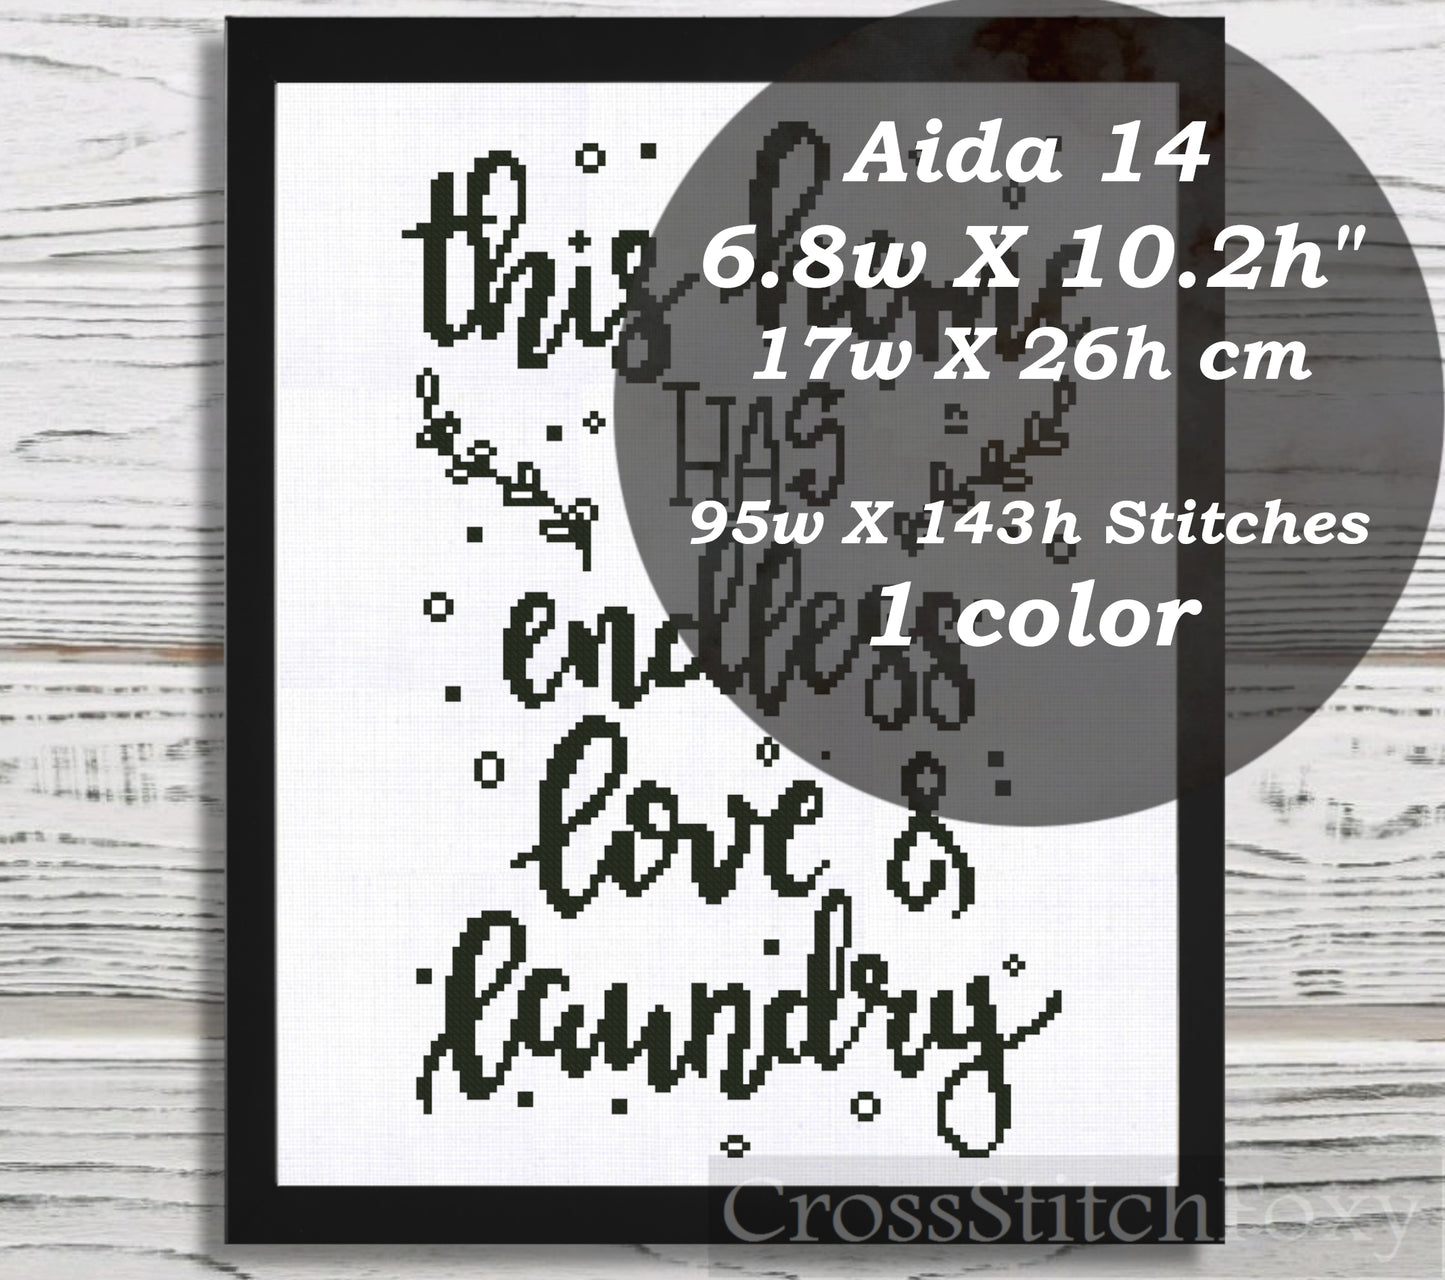 This Home Has Endless Love And Laundry cross stitch pattern